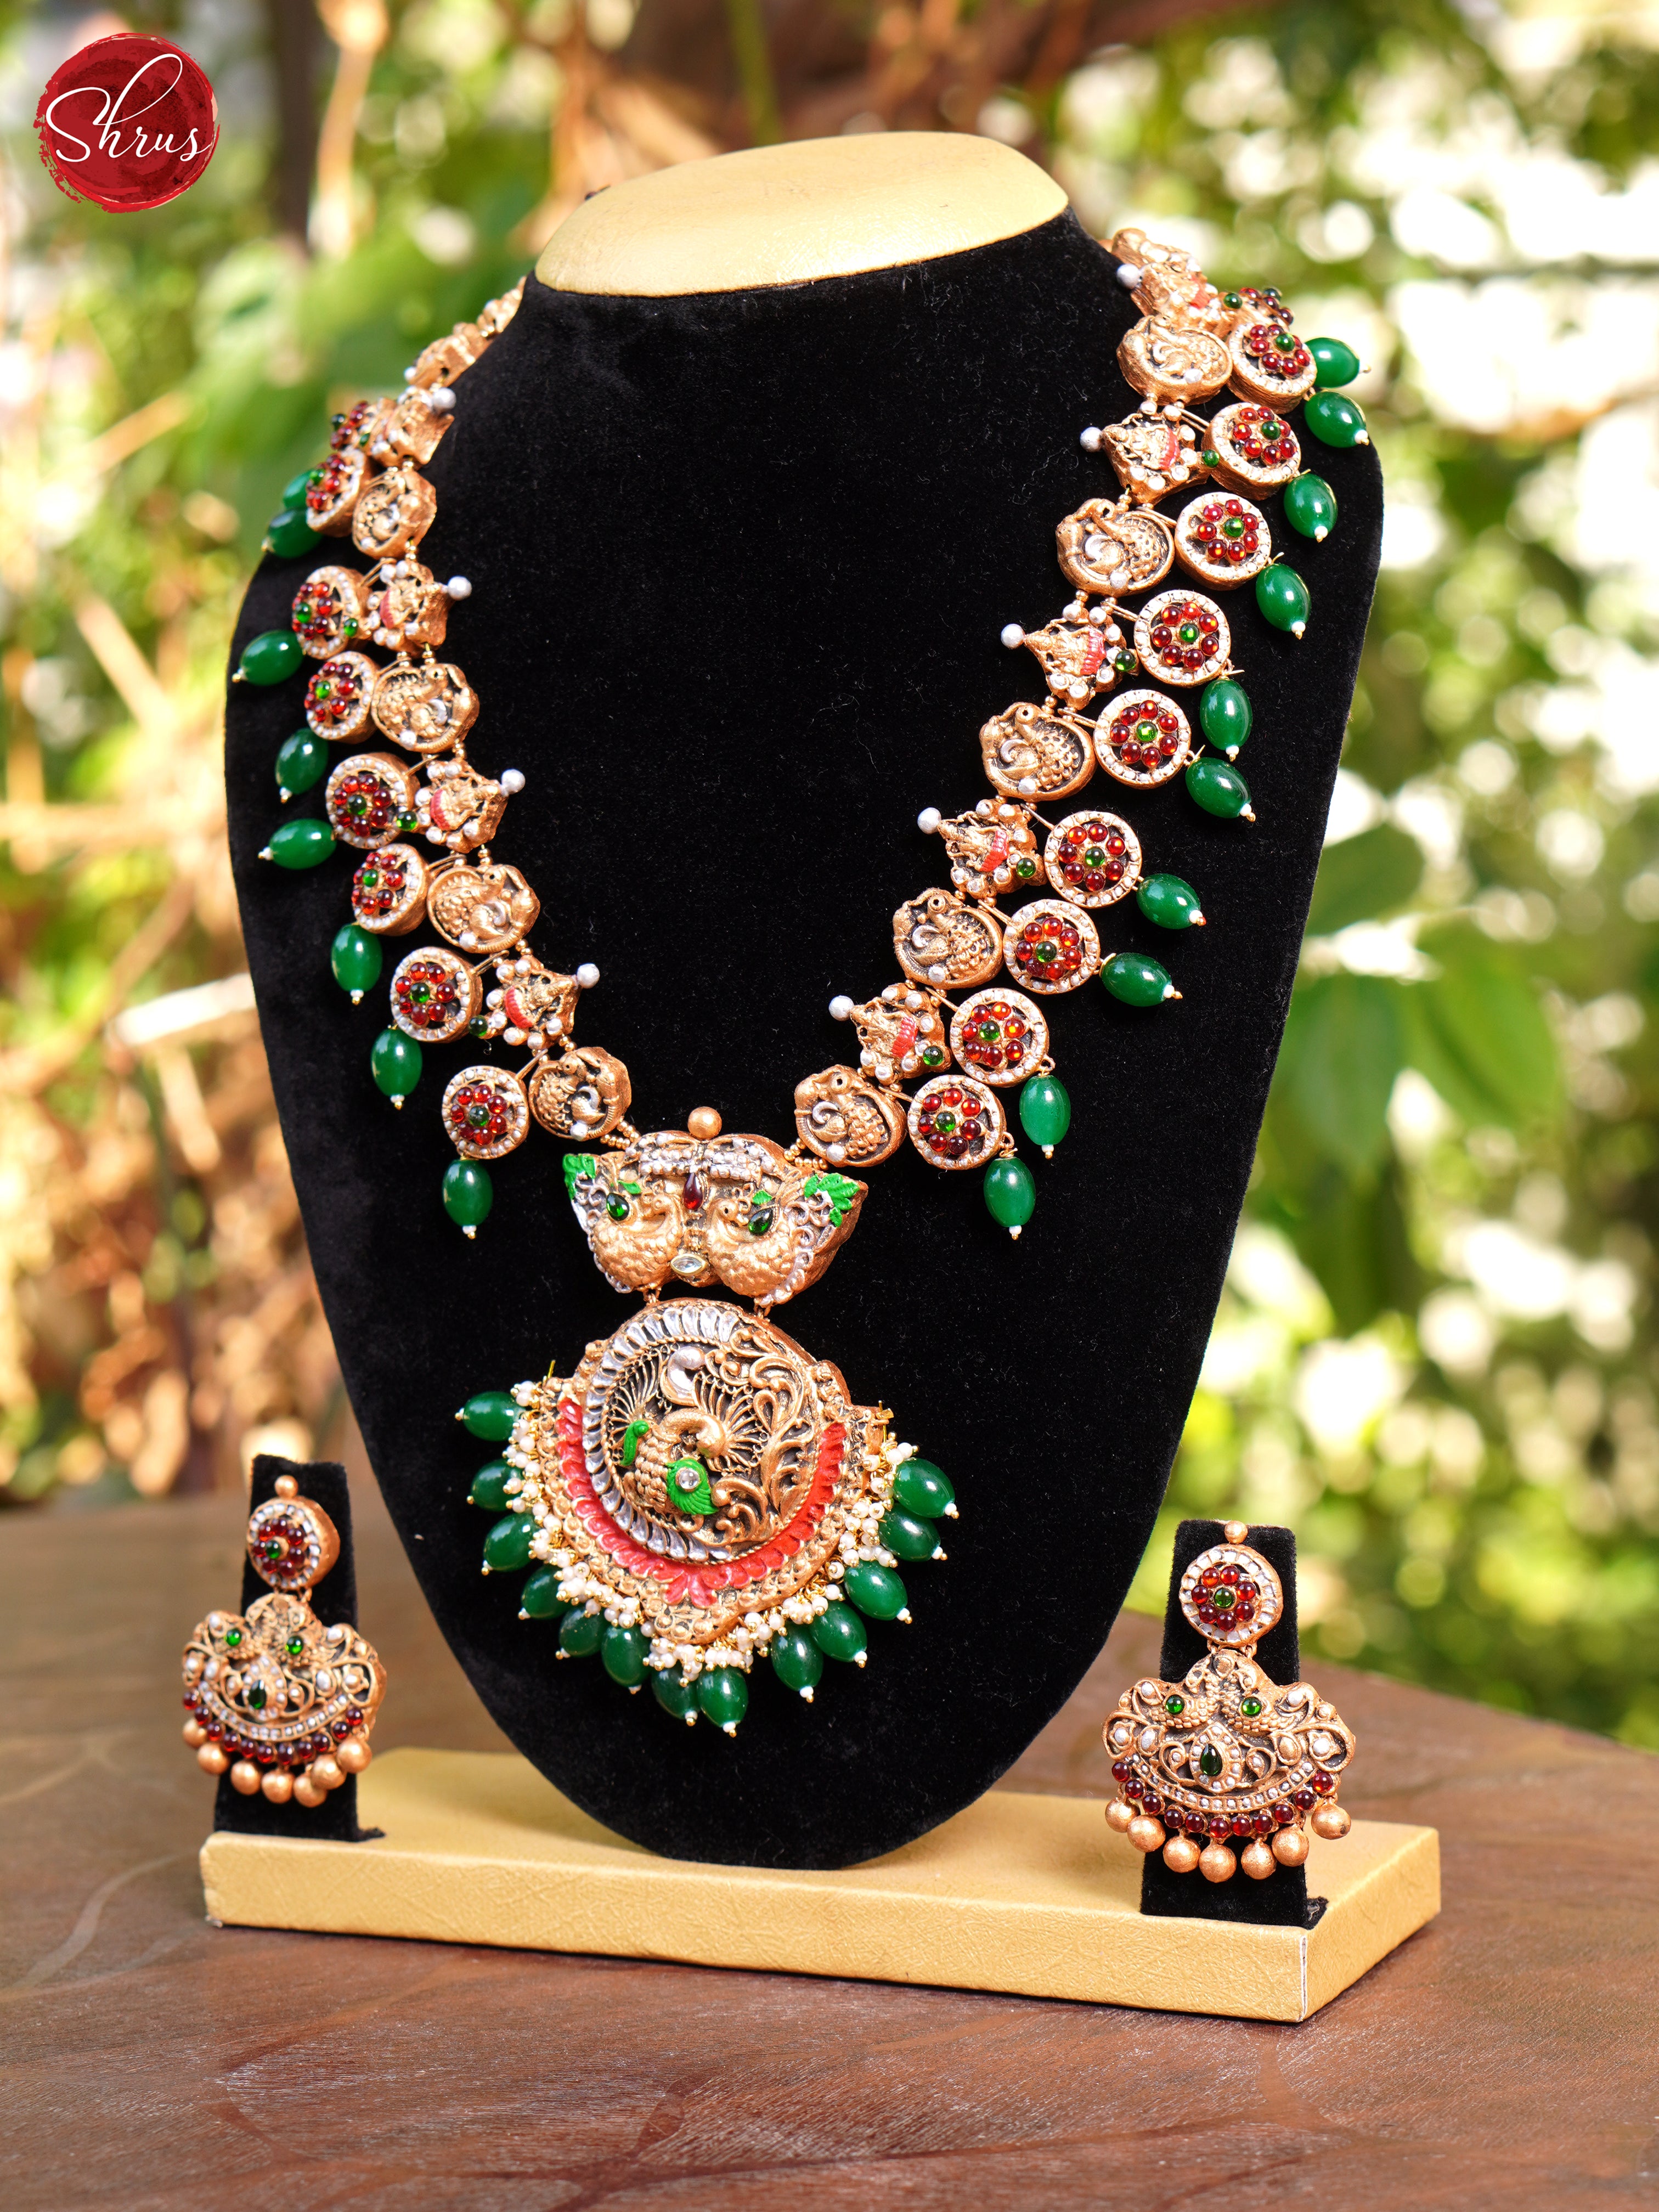 Handcrafted  Peacock Terracotta necklace with Chandballi Jhumkas- Accessories - Shop on ShrusEternity.com